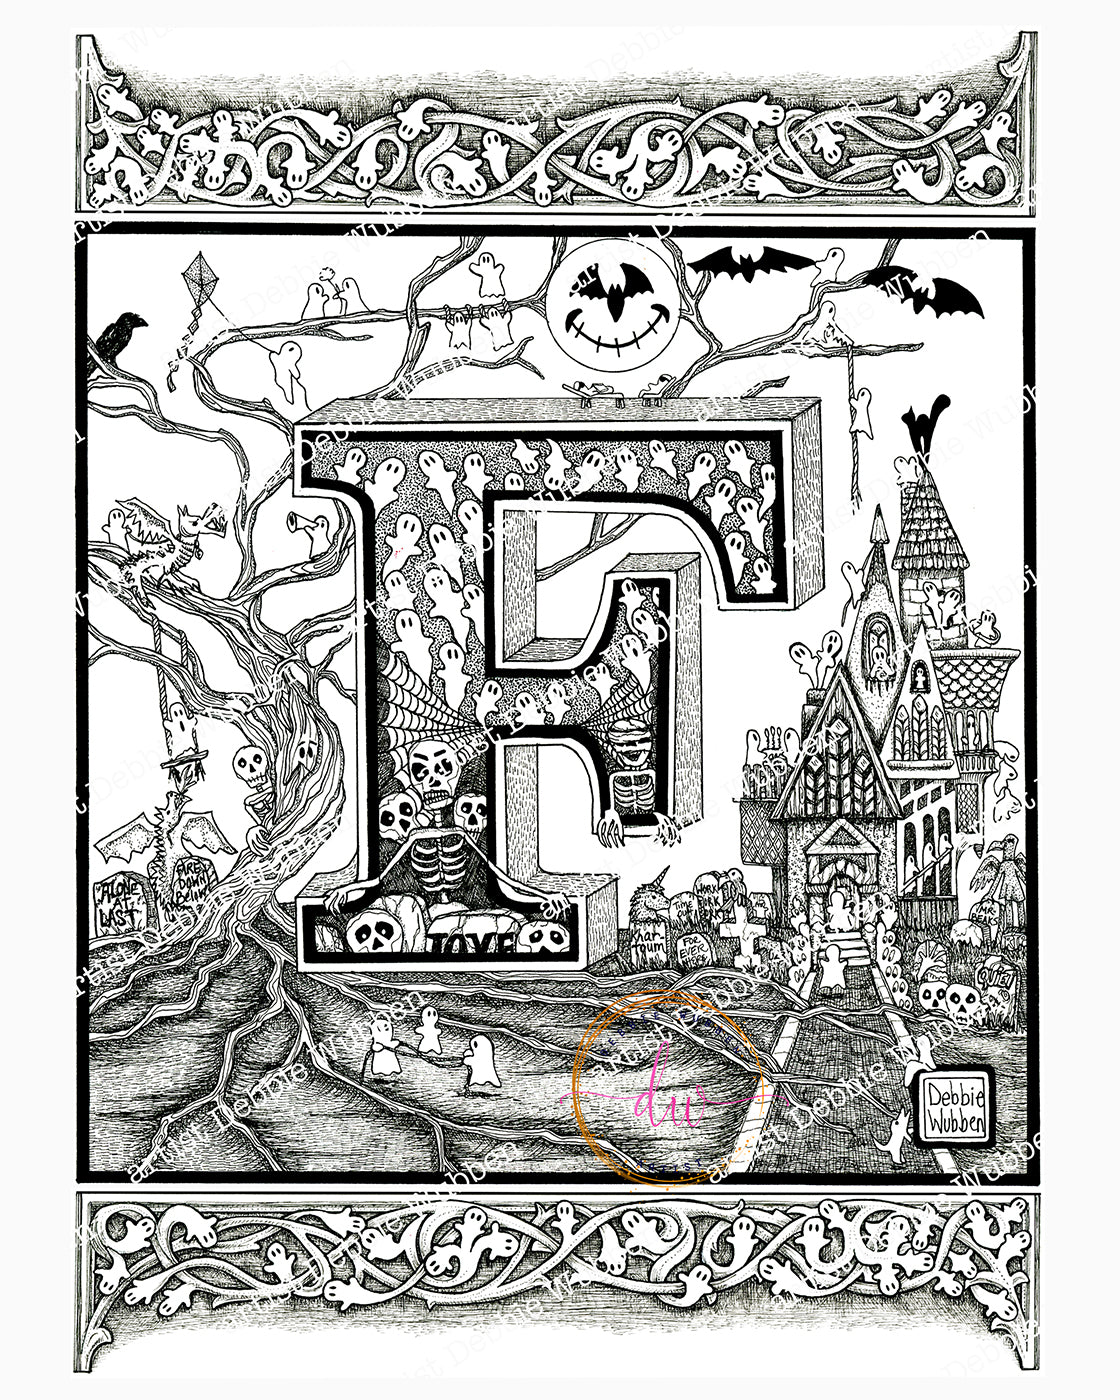 A Haunted Alphabet - Letter "F"